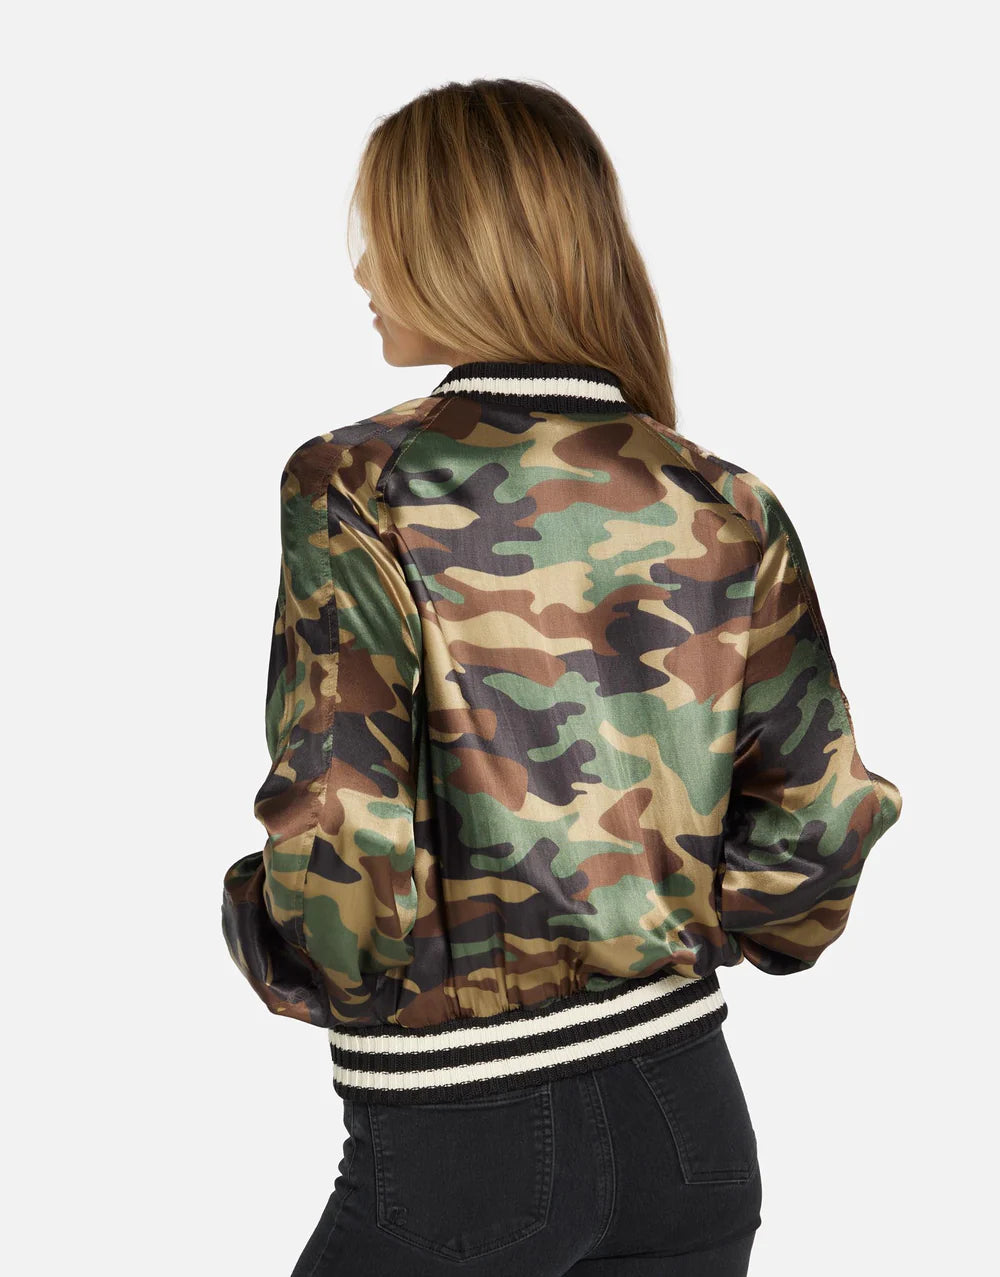 Brayden Camo Jacket by Michael Lauren | Made in LA 100% Rayon Dry Clean Recommended ML Signature Soft Satin Fabric Elastic Waistband  | Alene Too located in FL